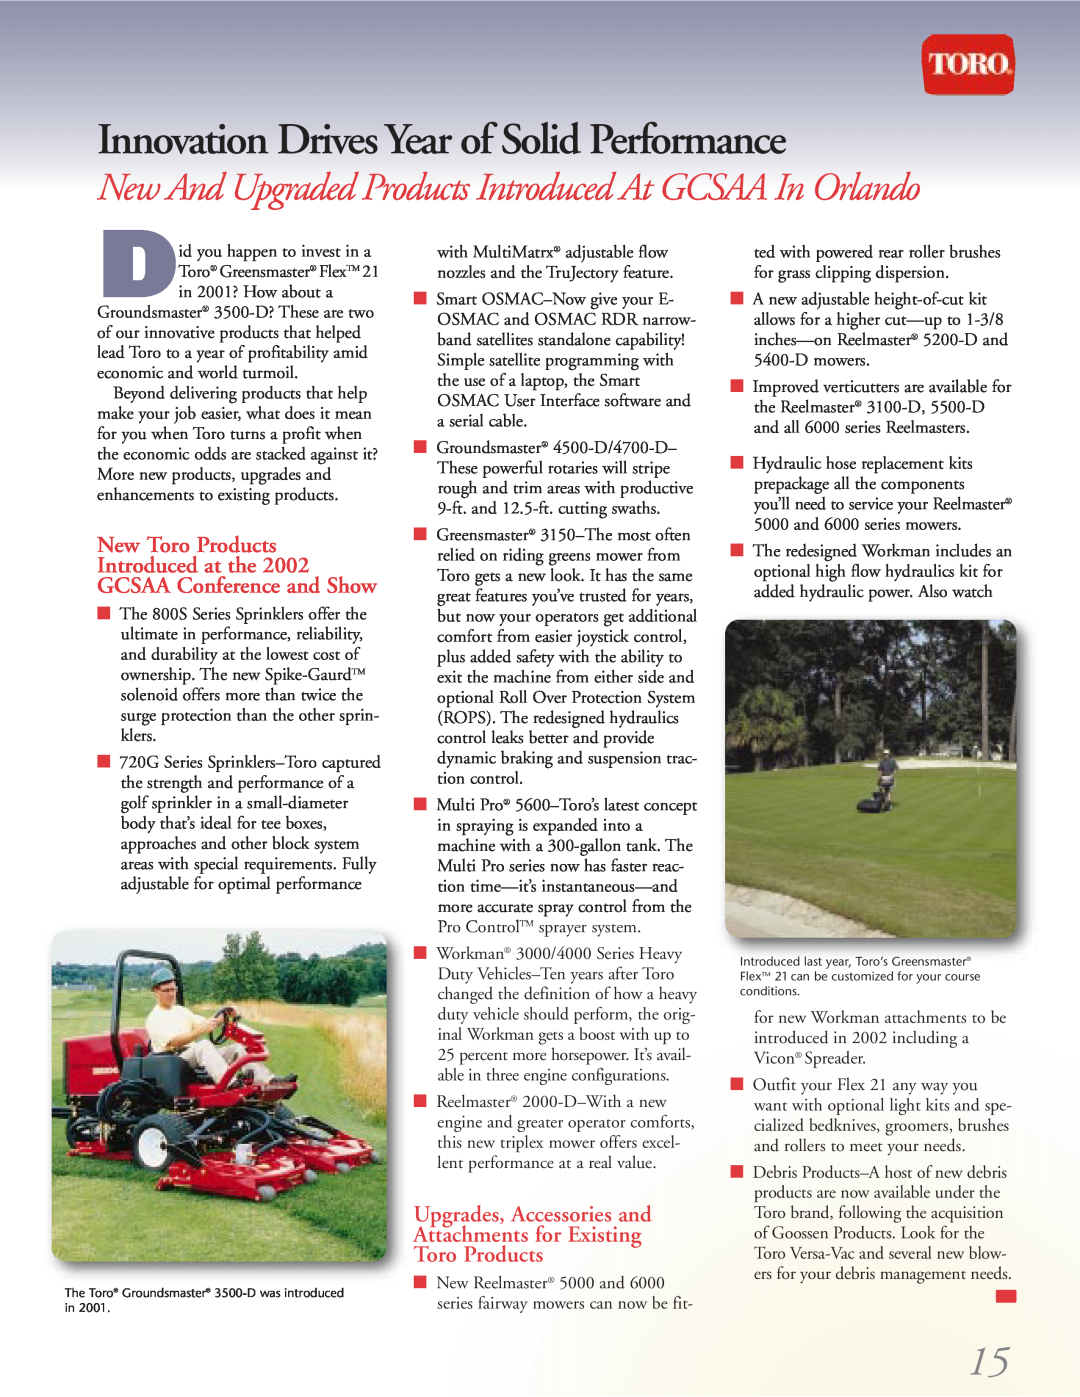 Toro 4500-D Innovation Drives Year of Solid Performance, New Toro Products Introduced at the, GCSAA Conference and Show 